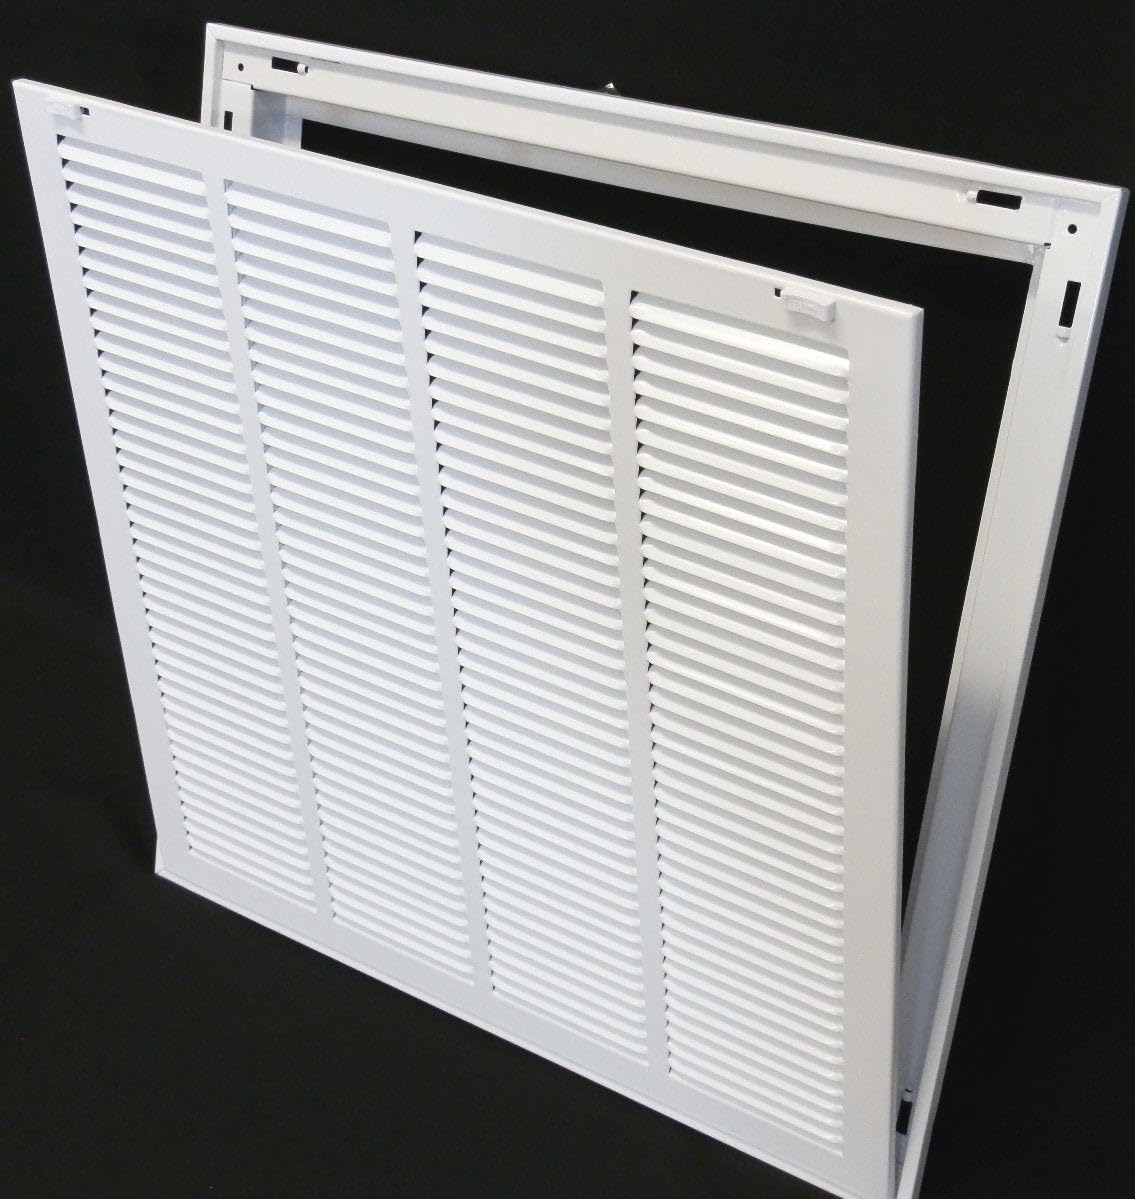 25&quot; X 32&quot; Steel Return Air Filter Grille for 1&quot; Filter - Removable Frame - [Outer Dimensions: 27 5/8&quot; X 34 5/8&quot;]